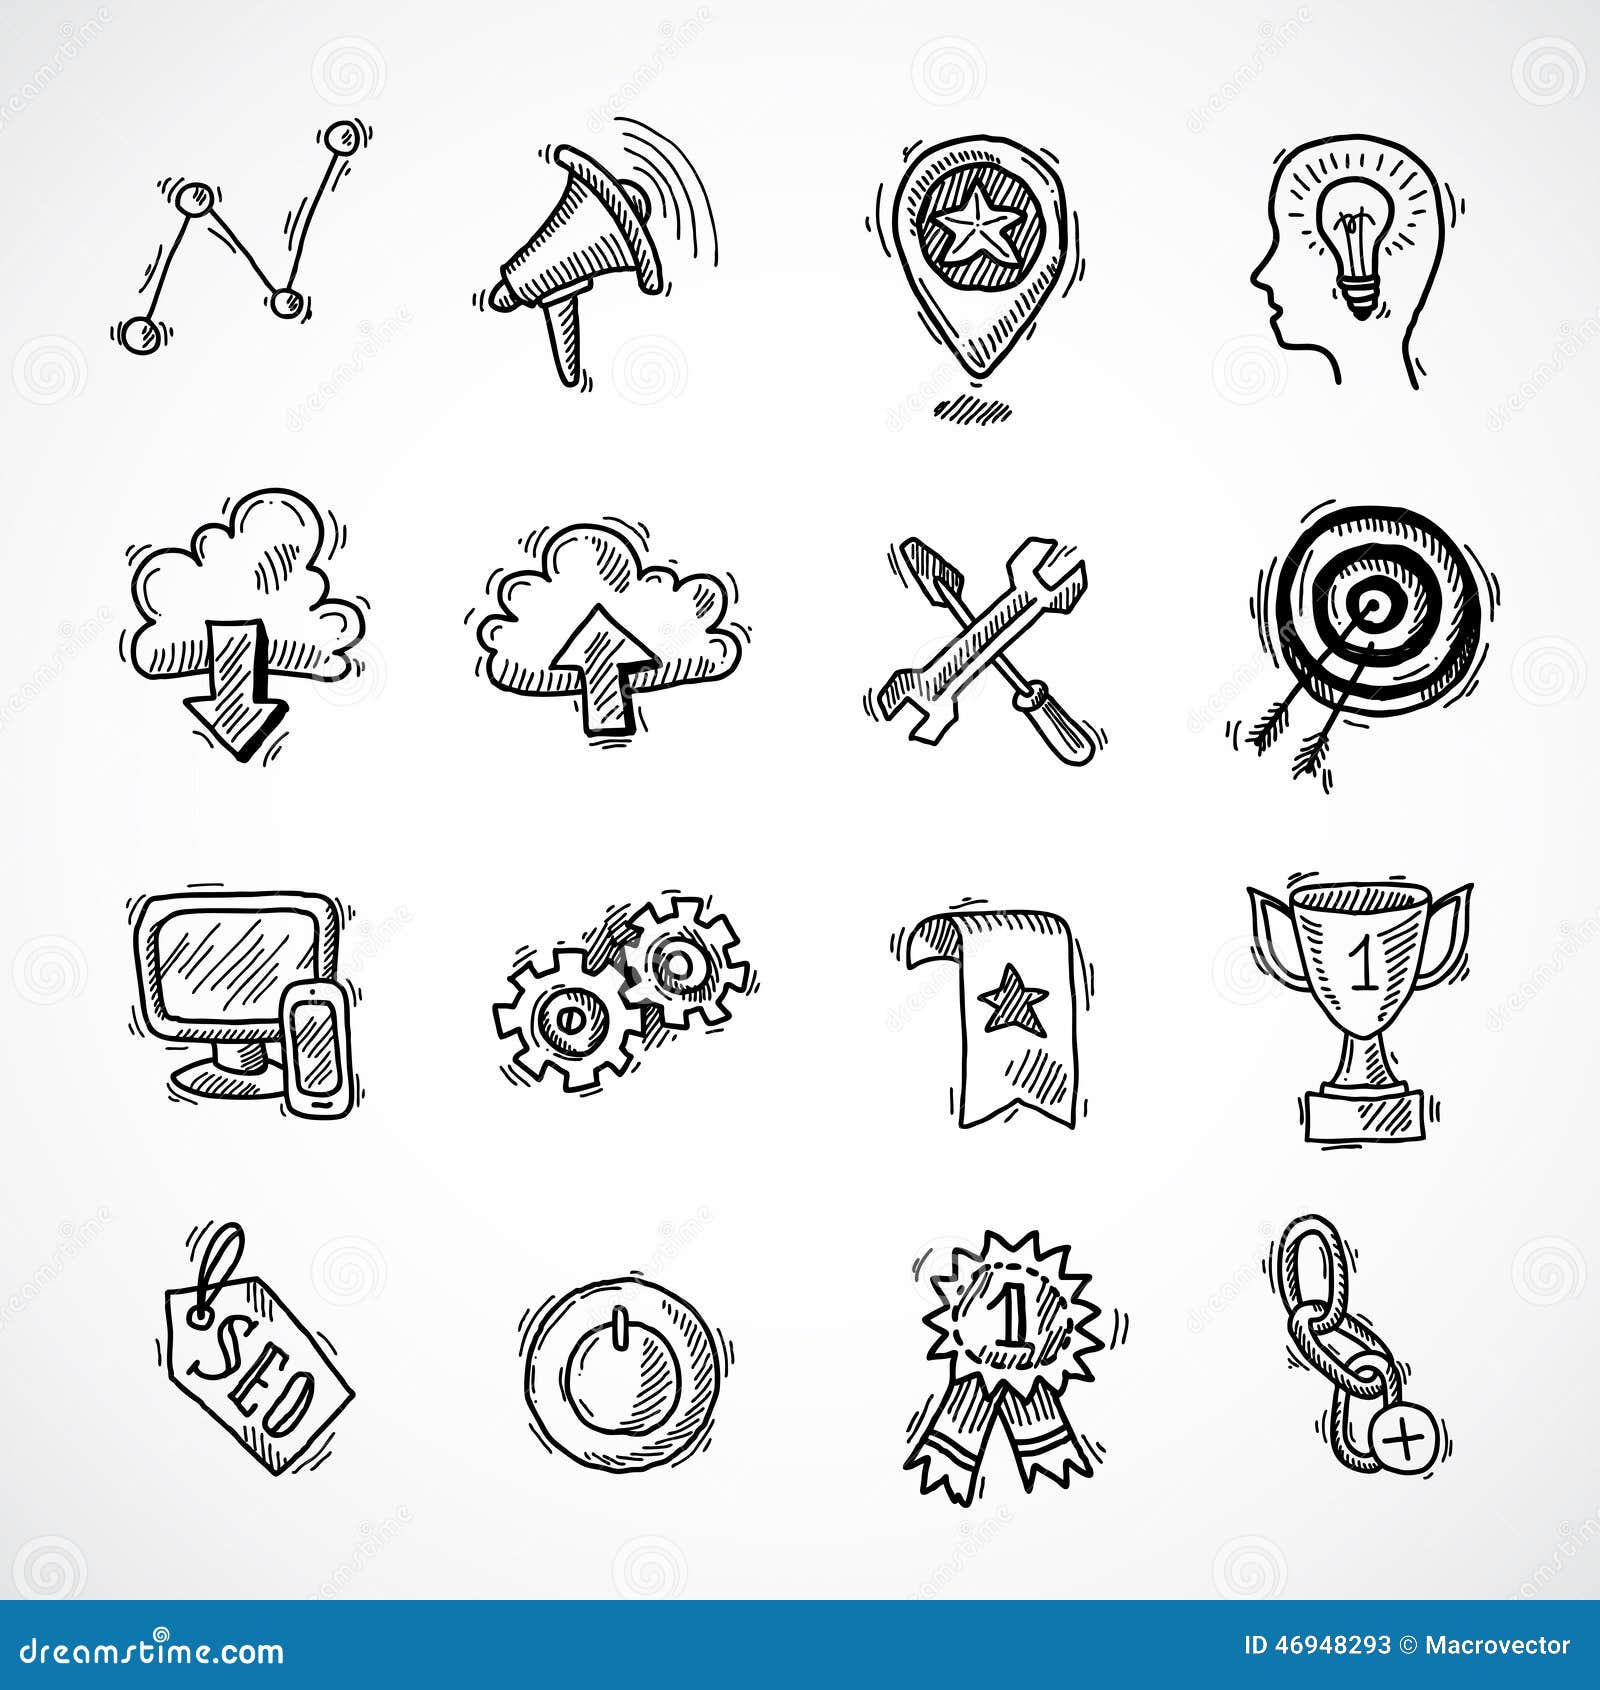 Doodle business collection. Sketch marketing icons, hand drawn startup By  Microvector | TheHungryJPEG